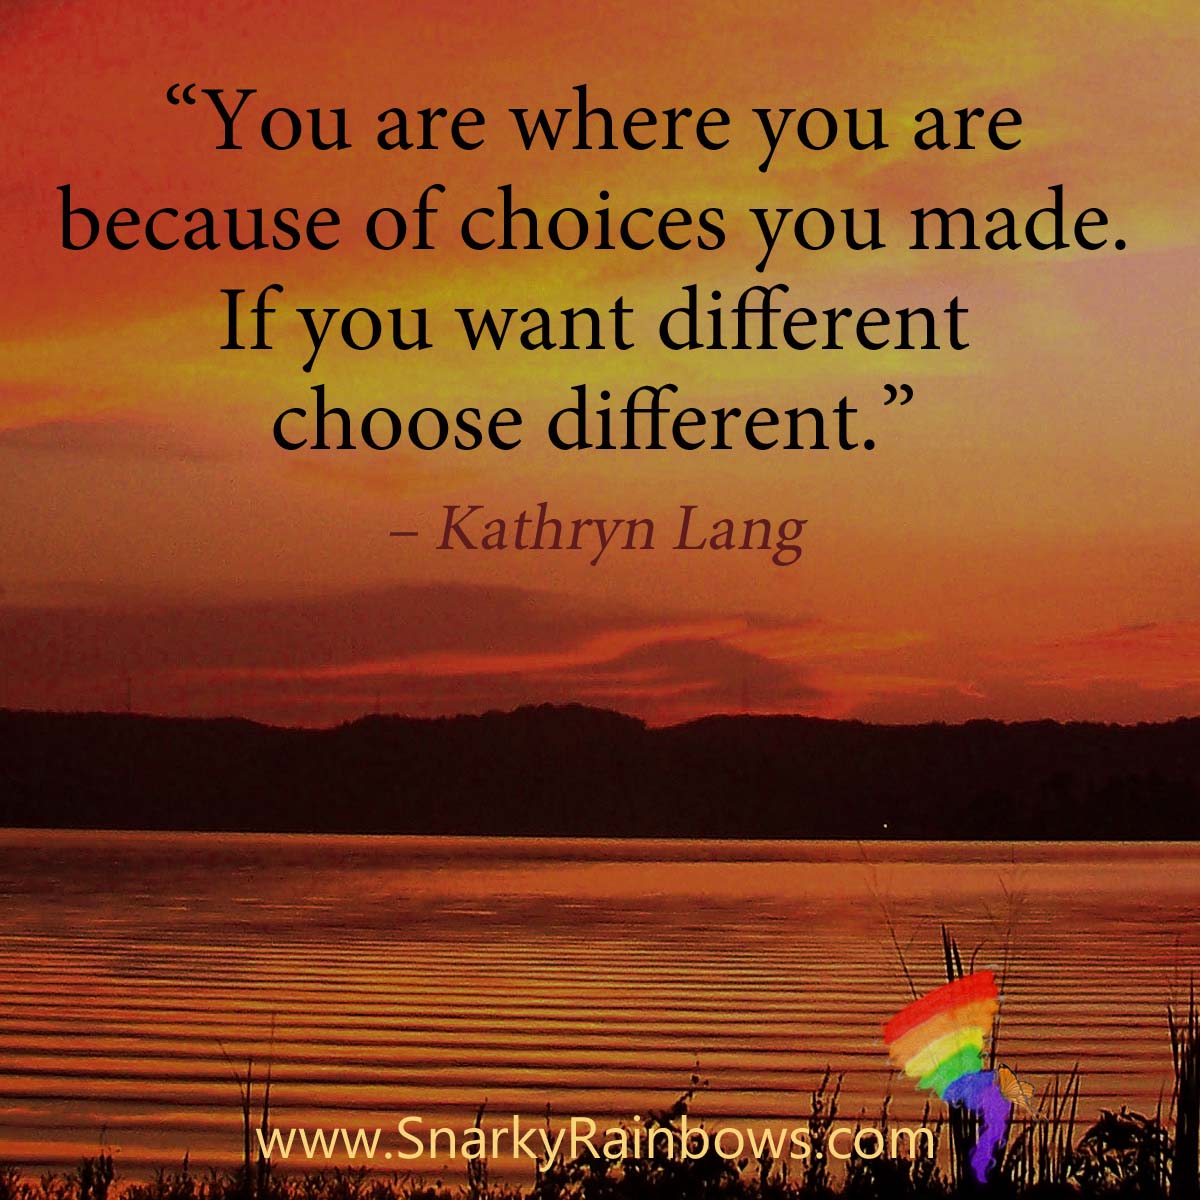 #QuoteoftheDay - want different choose different